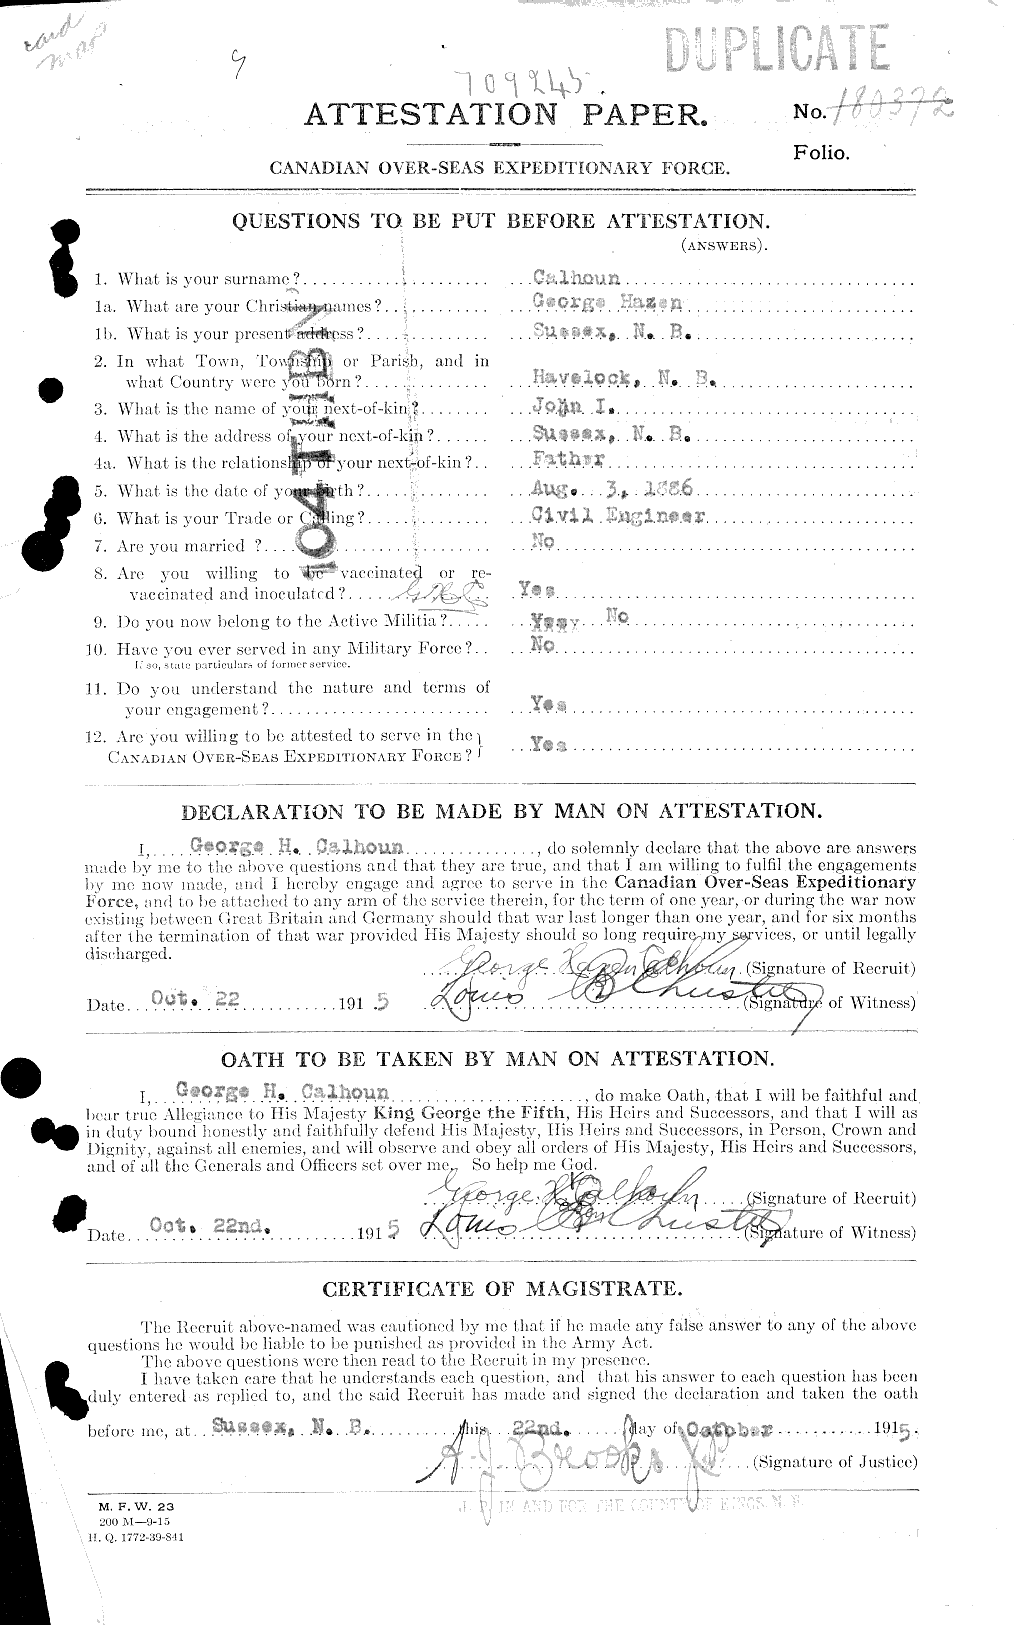 Personnel Records of the First World War - CEF 001146a